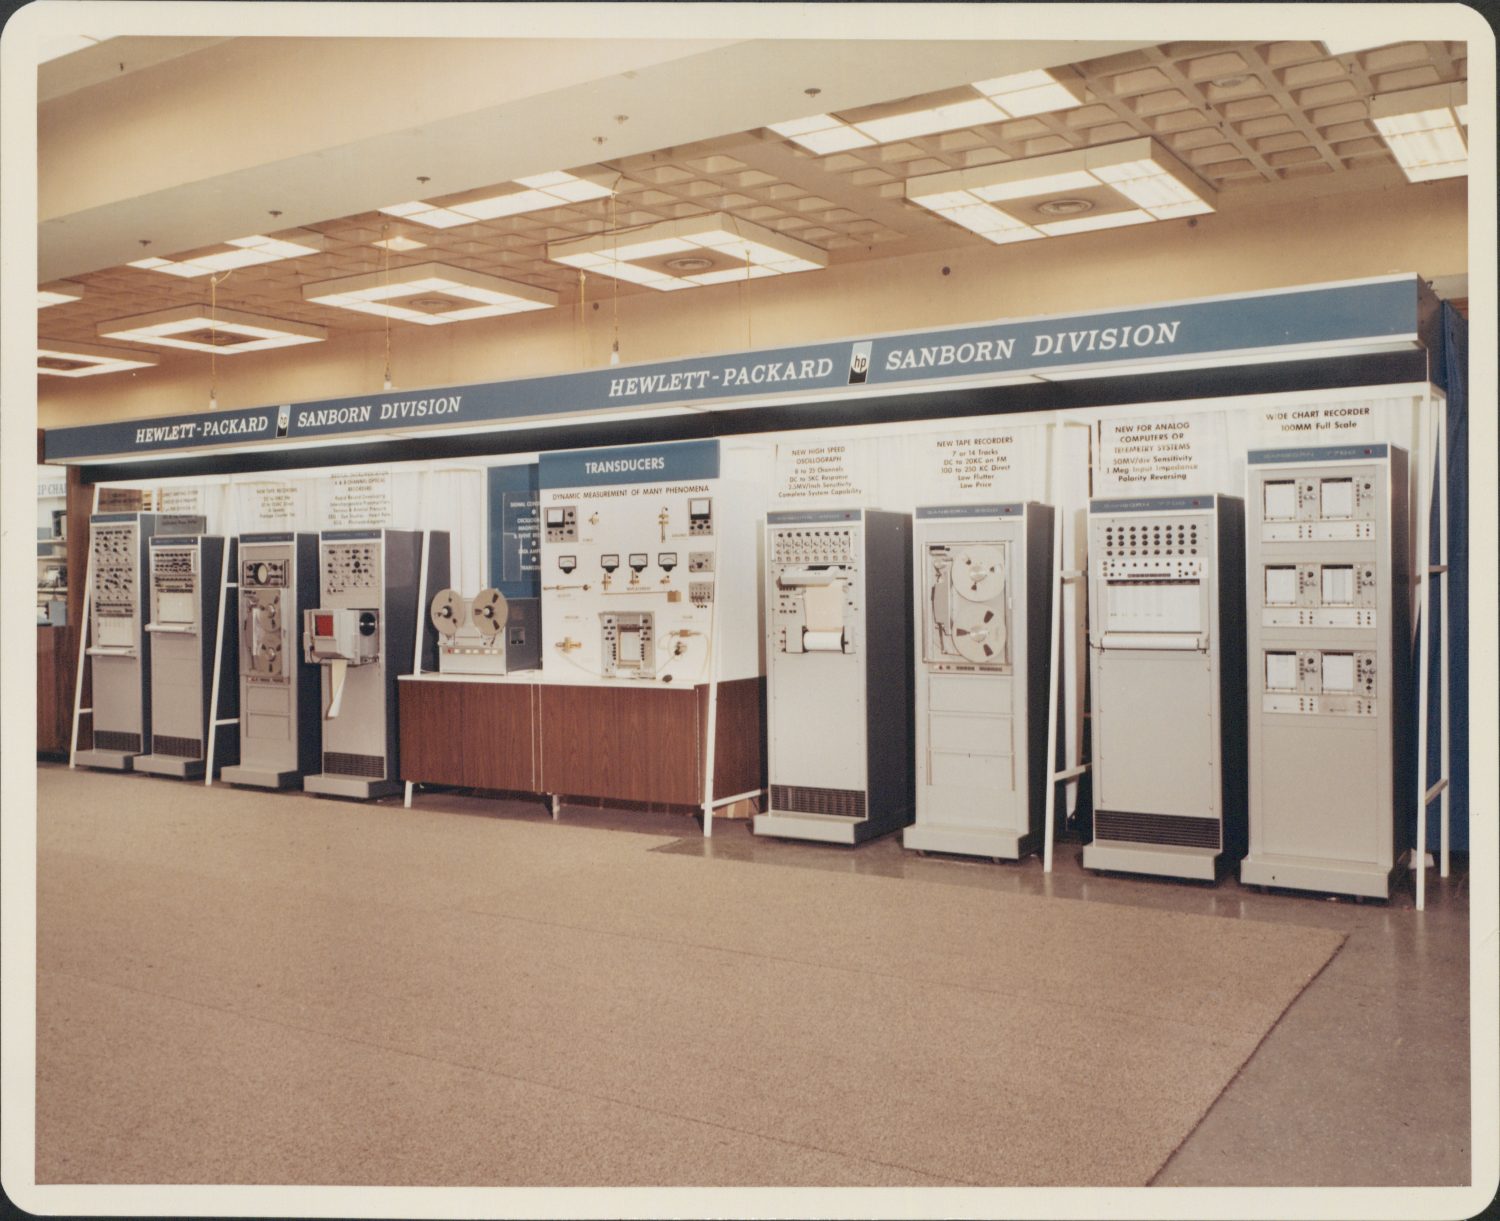 A display showcasing the instruments from the Sanborn Division of Hewlett-Packard in 1967.